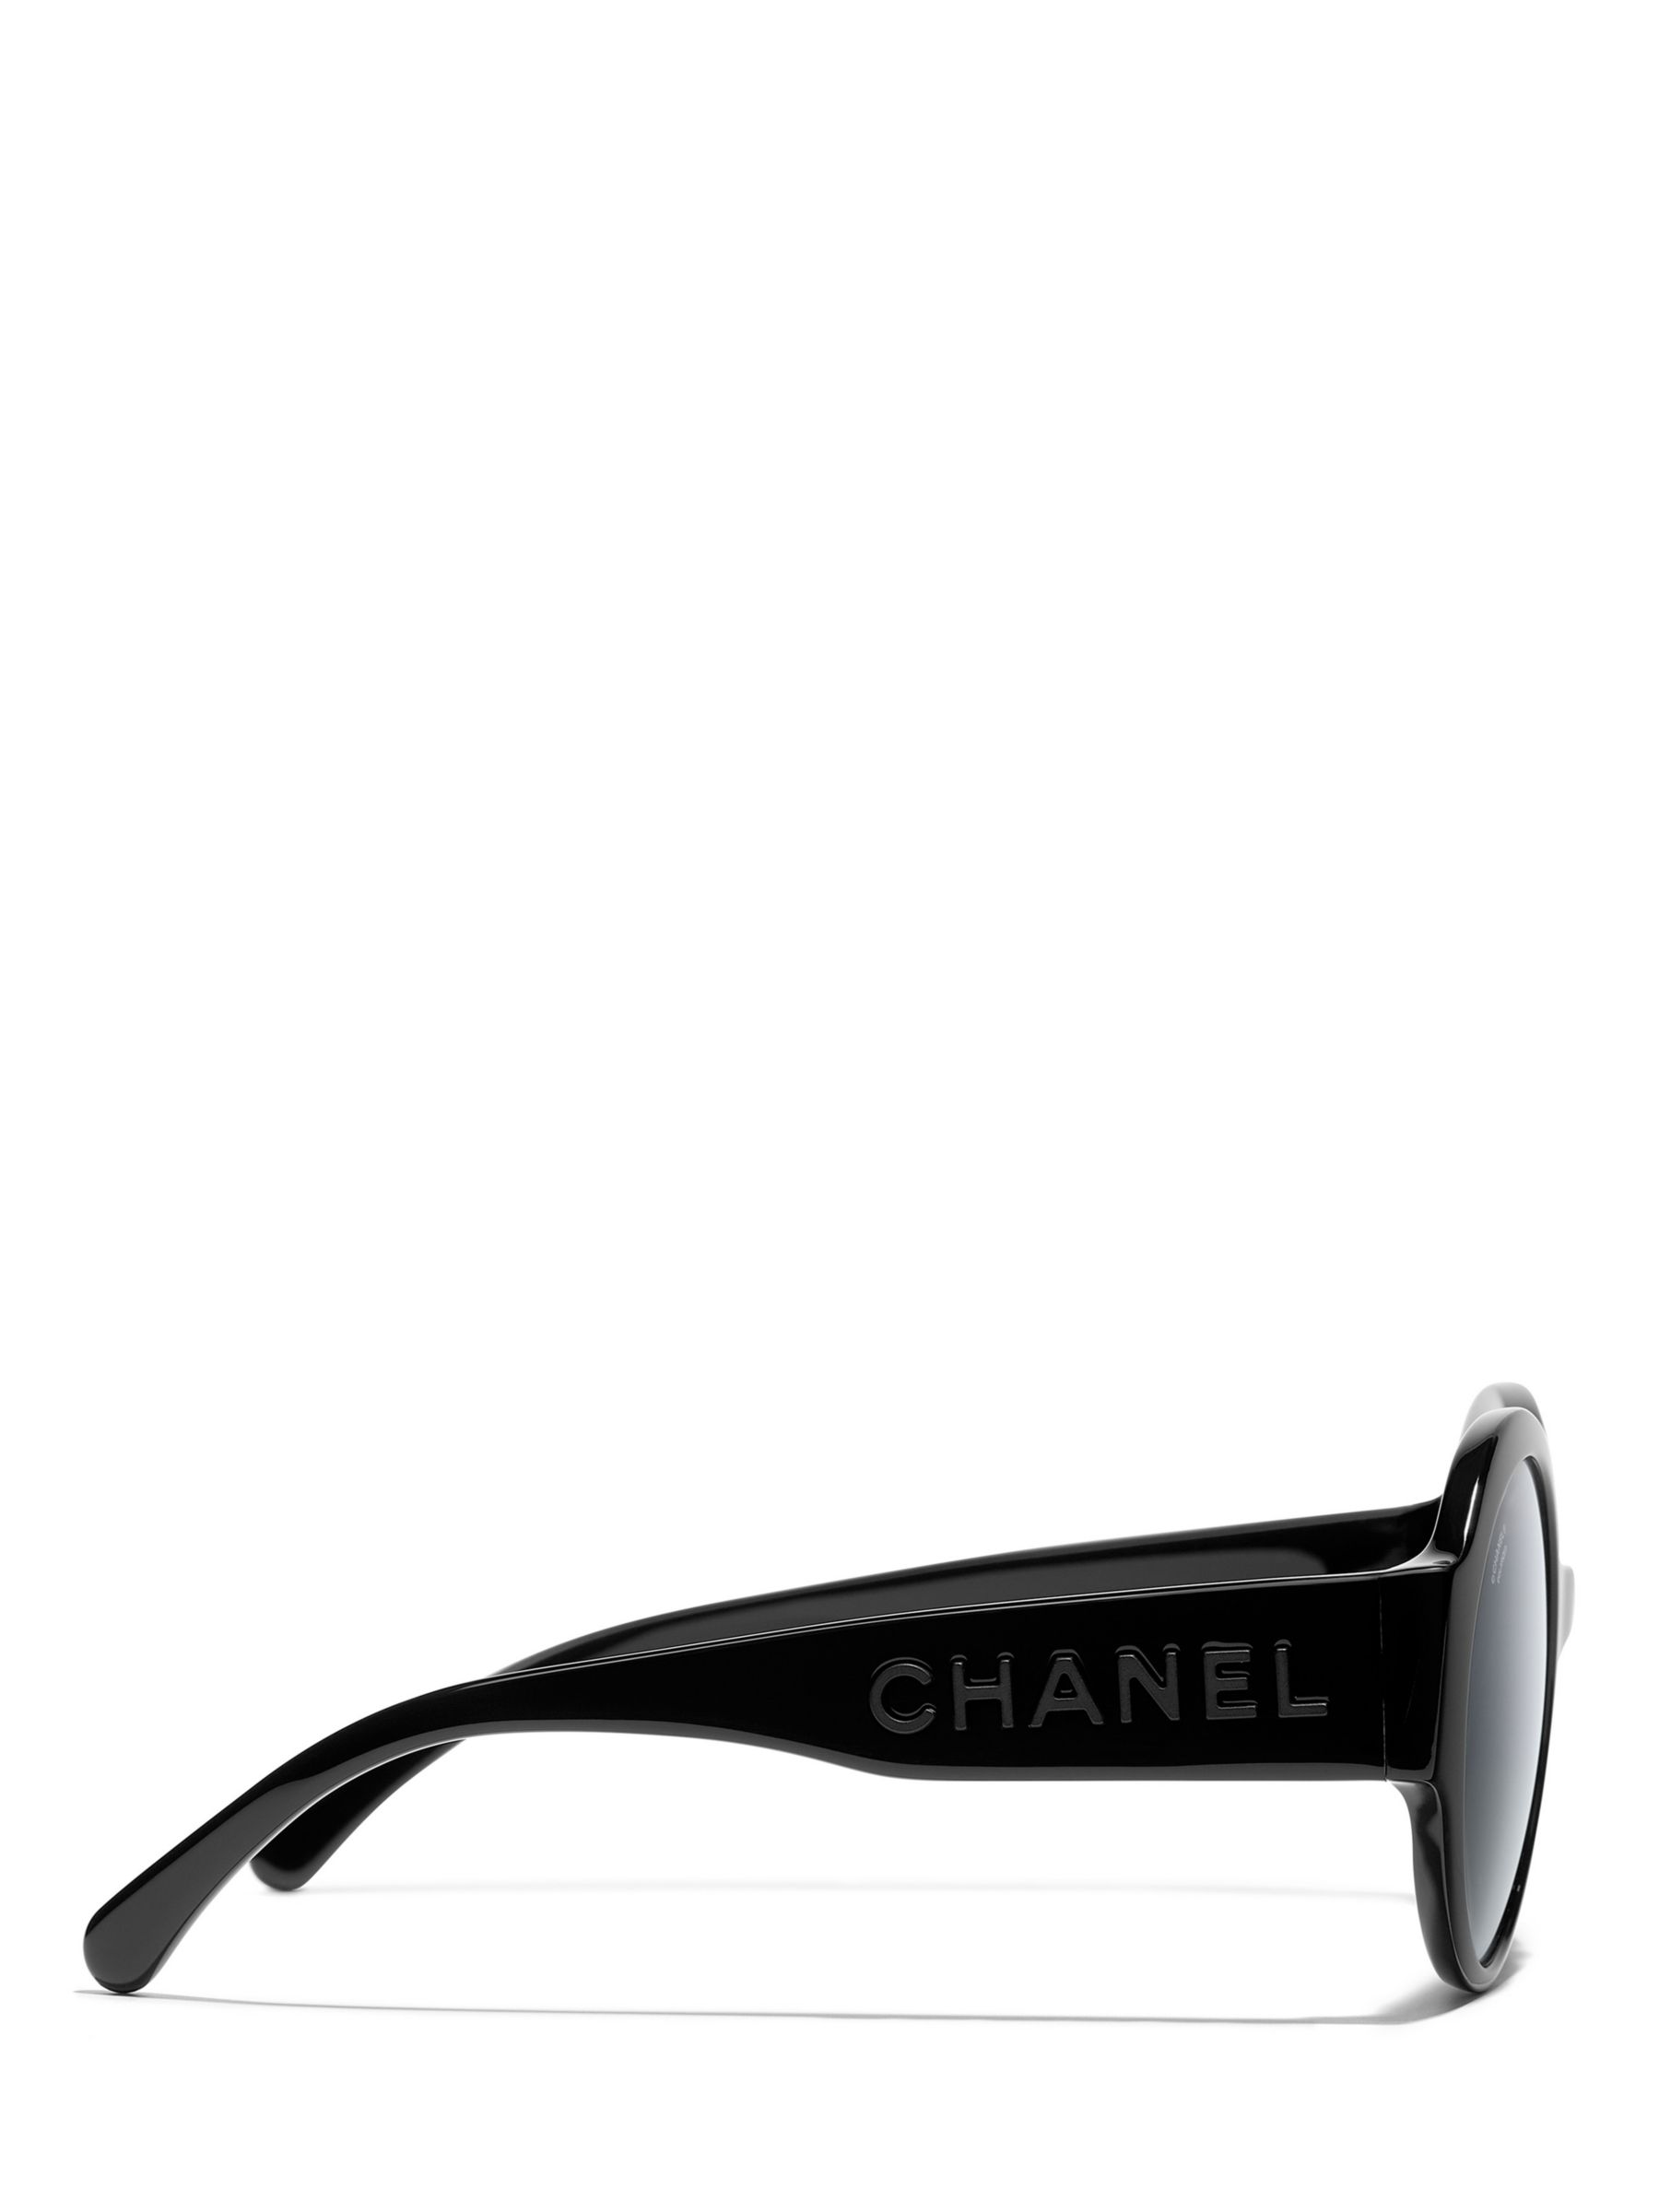 CHANEL Oval Sunglasses CH5410 Black/Grey at John Lewis & Partners